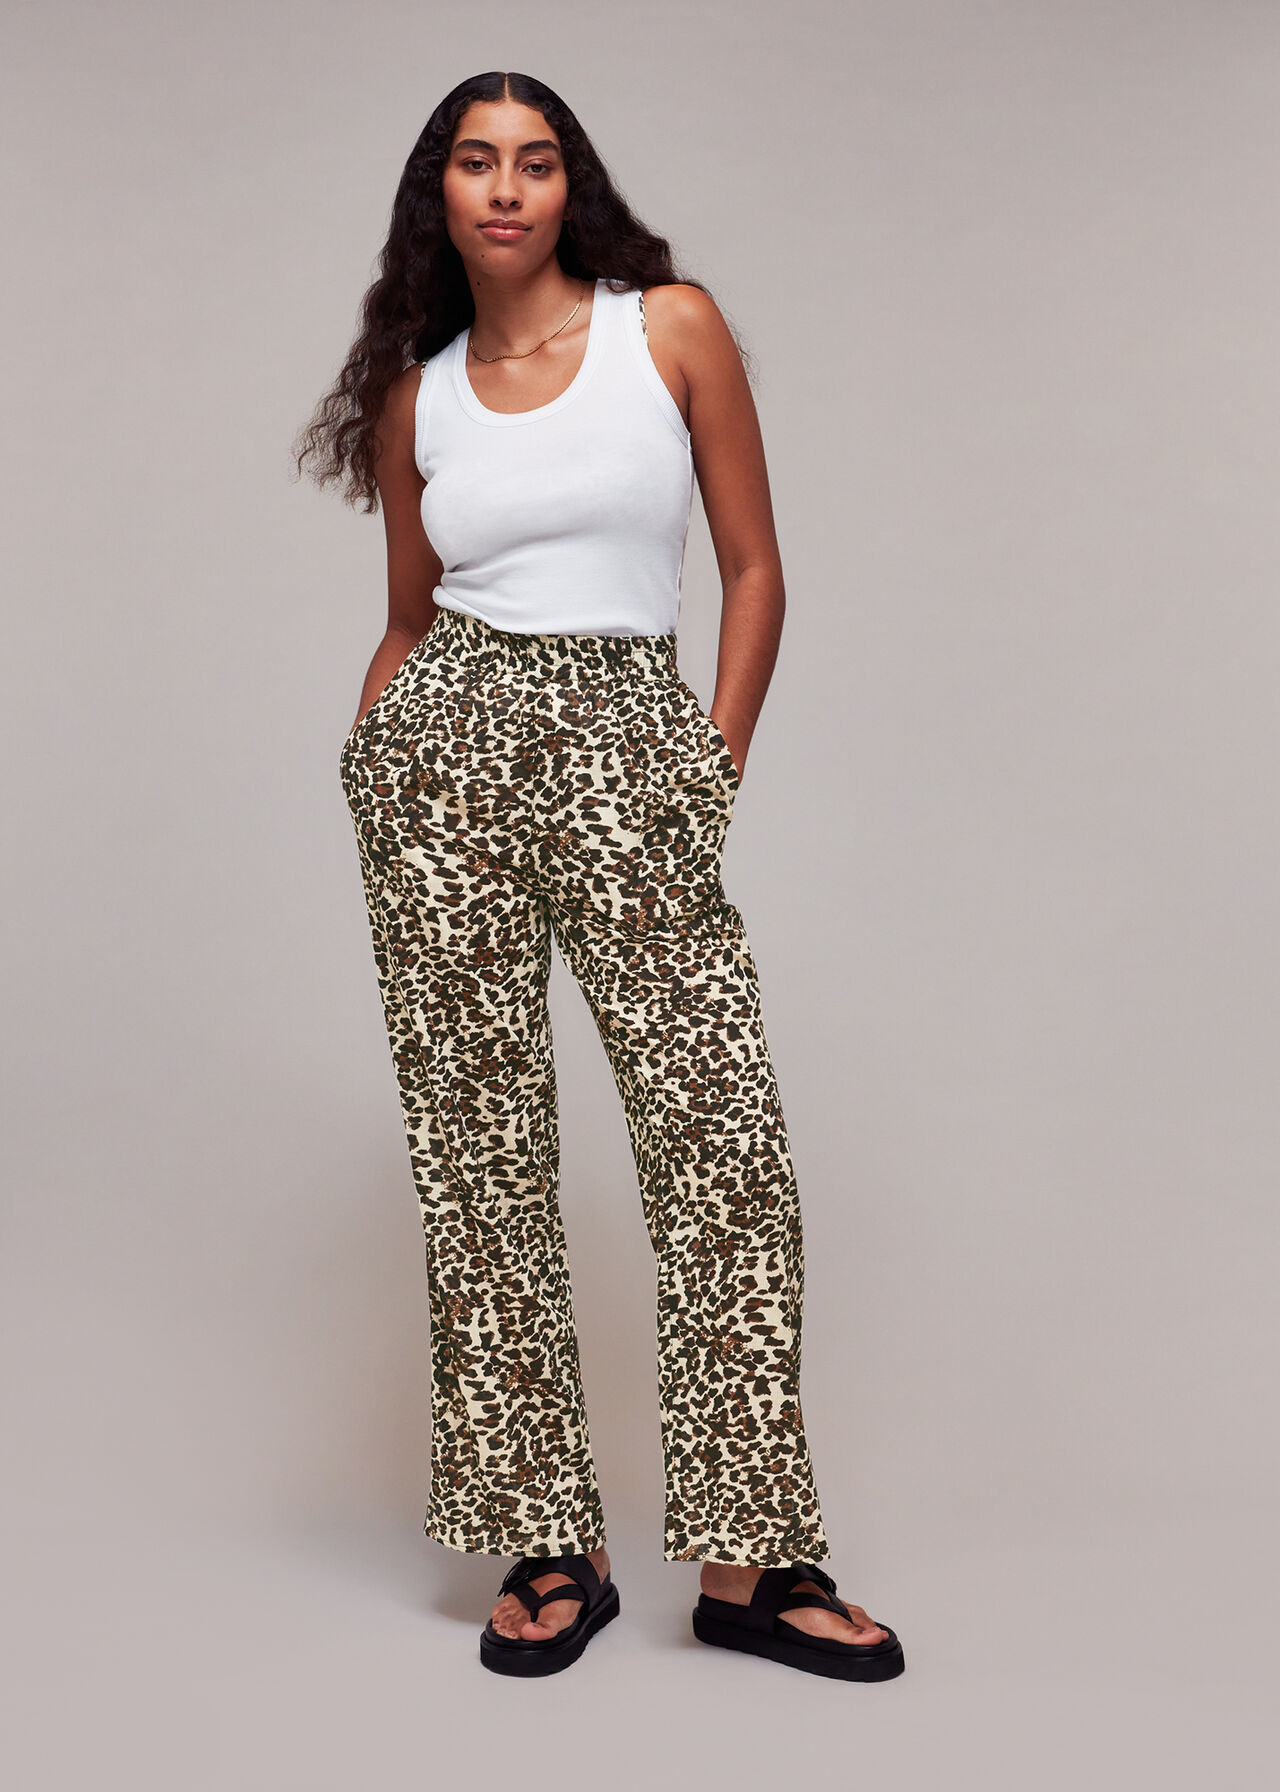 Whistles leopard print trousers fashioned entirely from cotton and with a loose flared silhouette. The animal print will look chic when paired with the matching shirt.